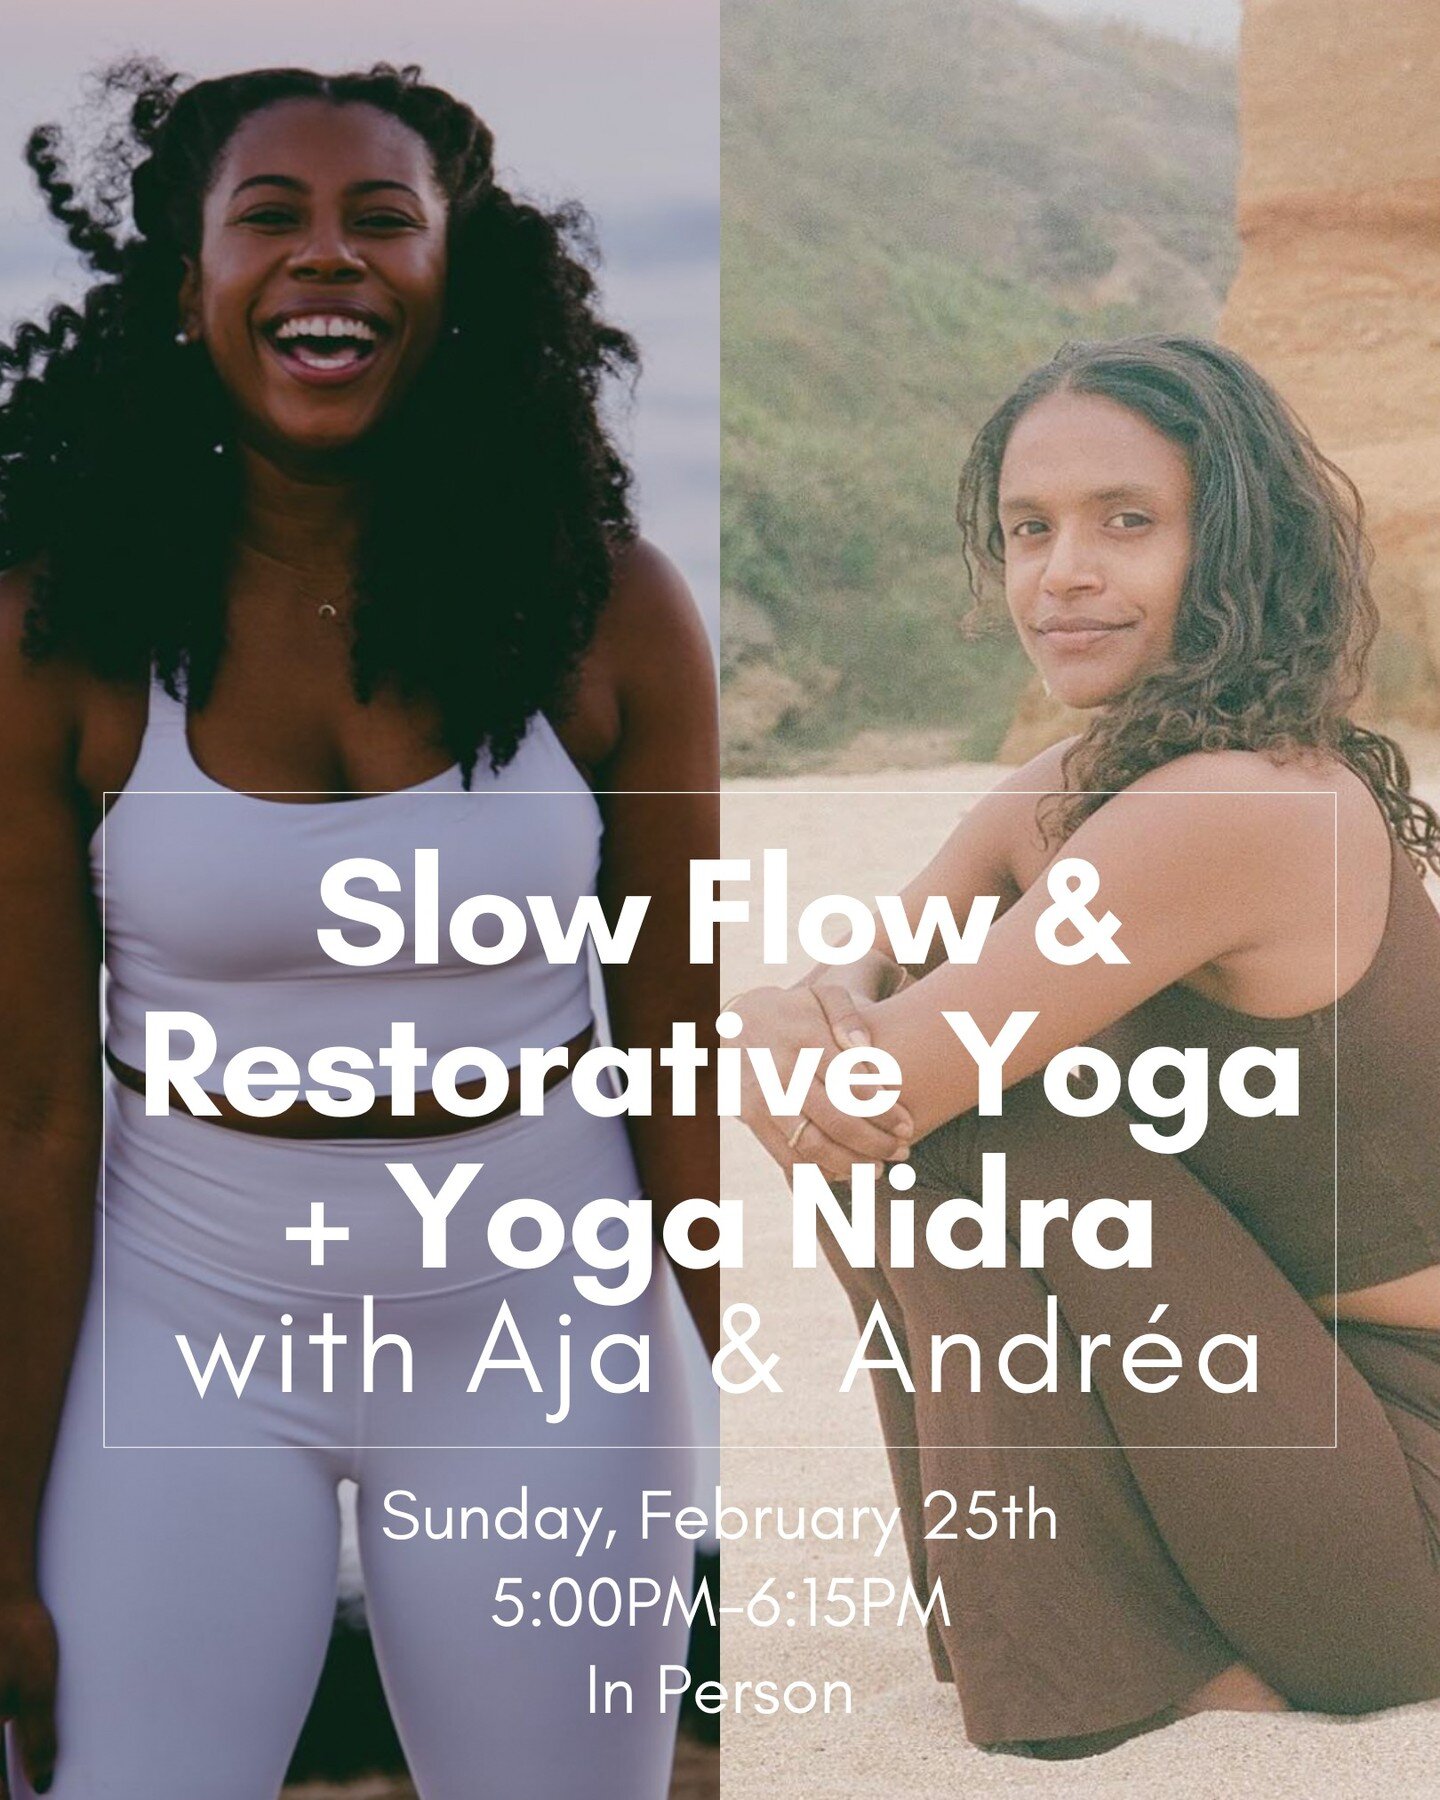 Honoring Black History Month, join @andrea.m.yoga and @aja_lauren for this deeply soothing Sunday class combining a soothing slow flow, restorative postures and the deeply restful practice of Yoga Nidra. Yoga Nidra is a form of guided meditation also